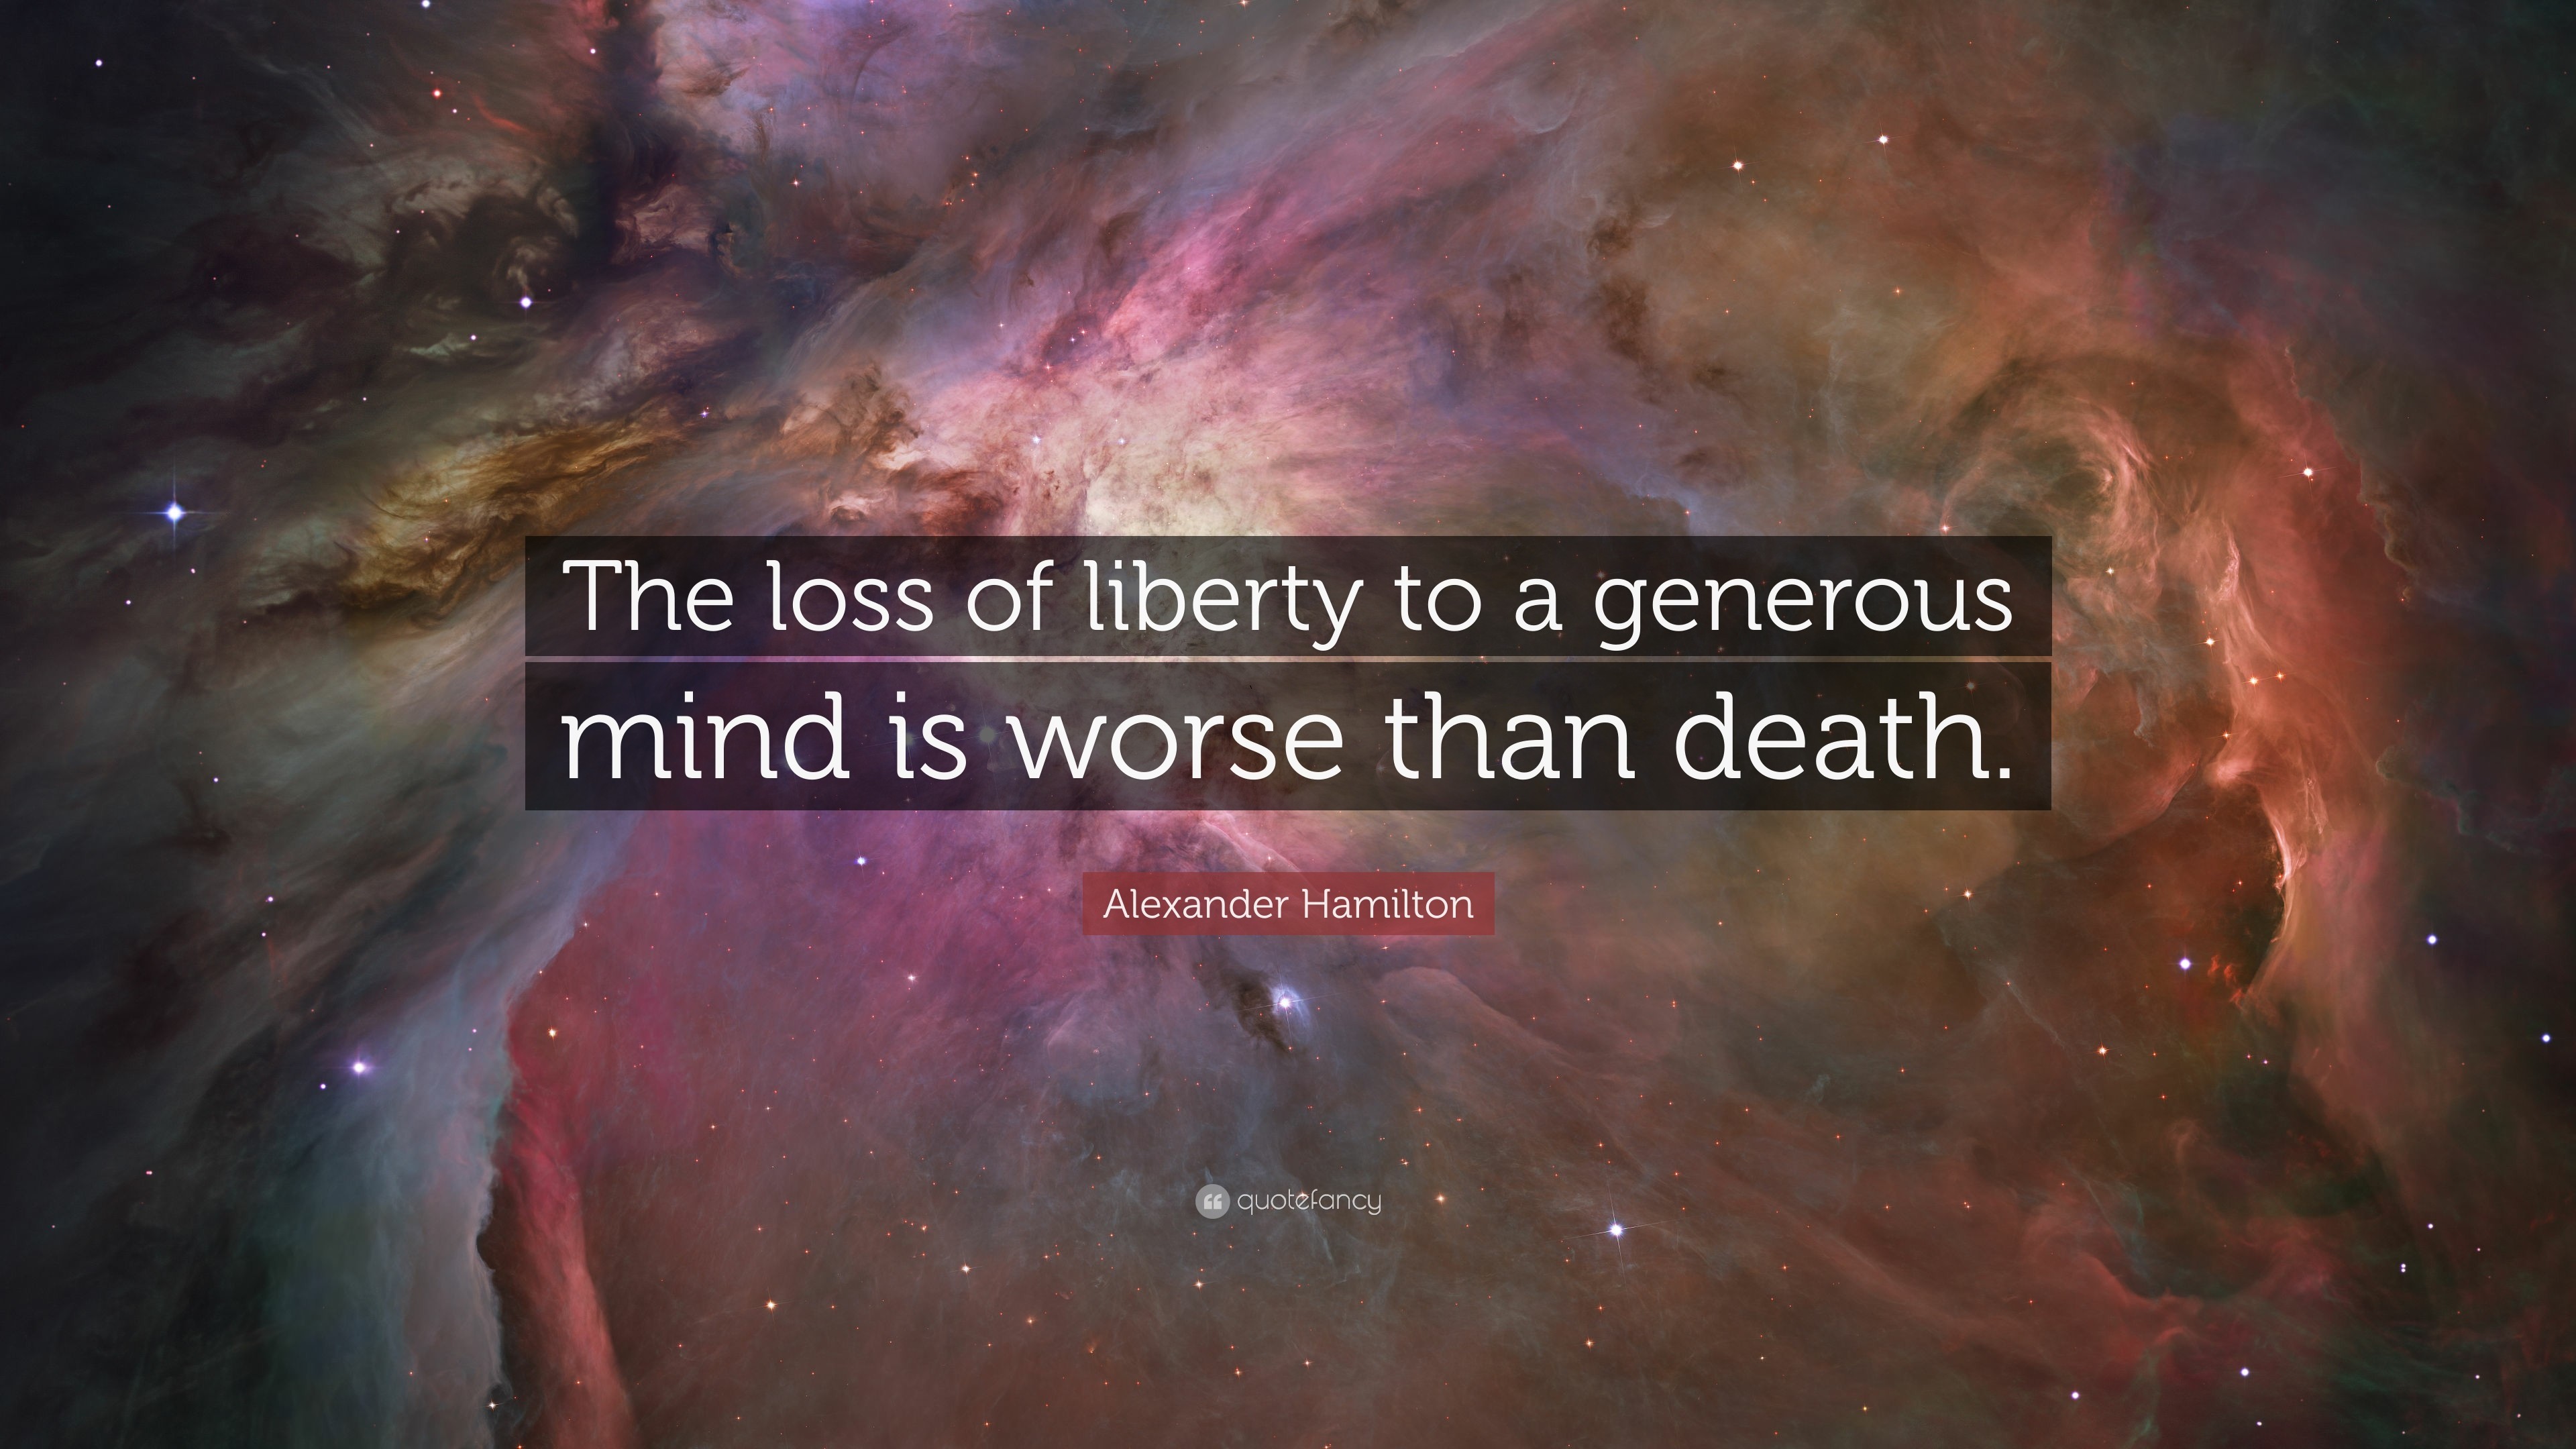 Alexander Hamilton Quote: “The loss of liberty to a generous mind is worse than